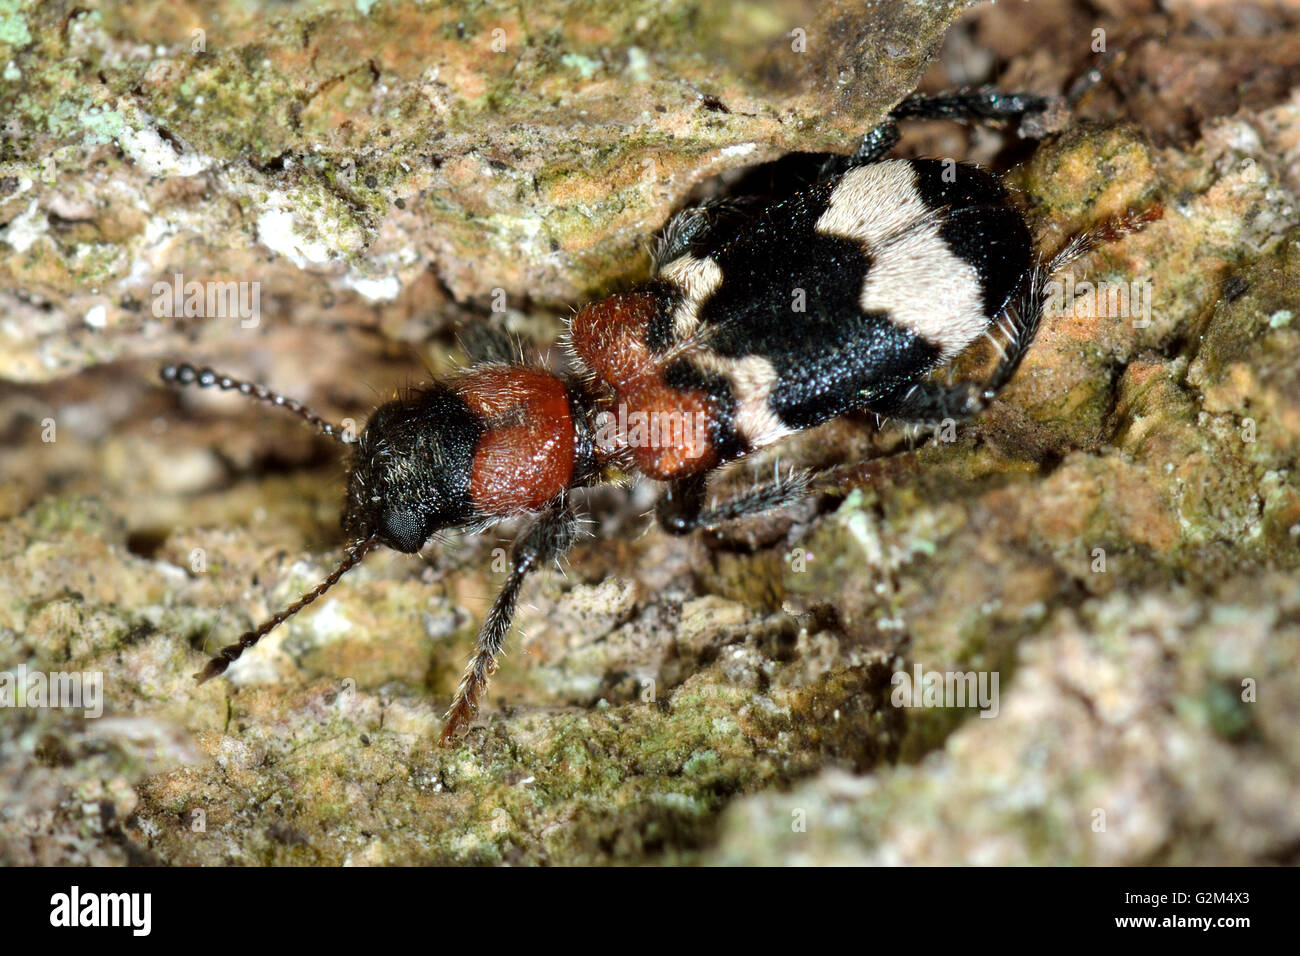 Ant beetle (Thanasimus formicarius) on bark. Black and white insect in the family Cleridae, hunting on tree in British woodland Stock Photo